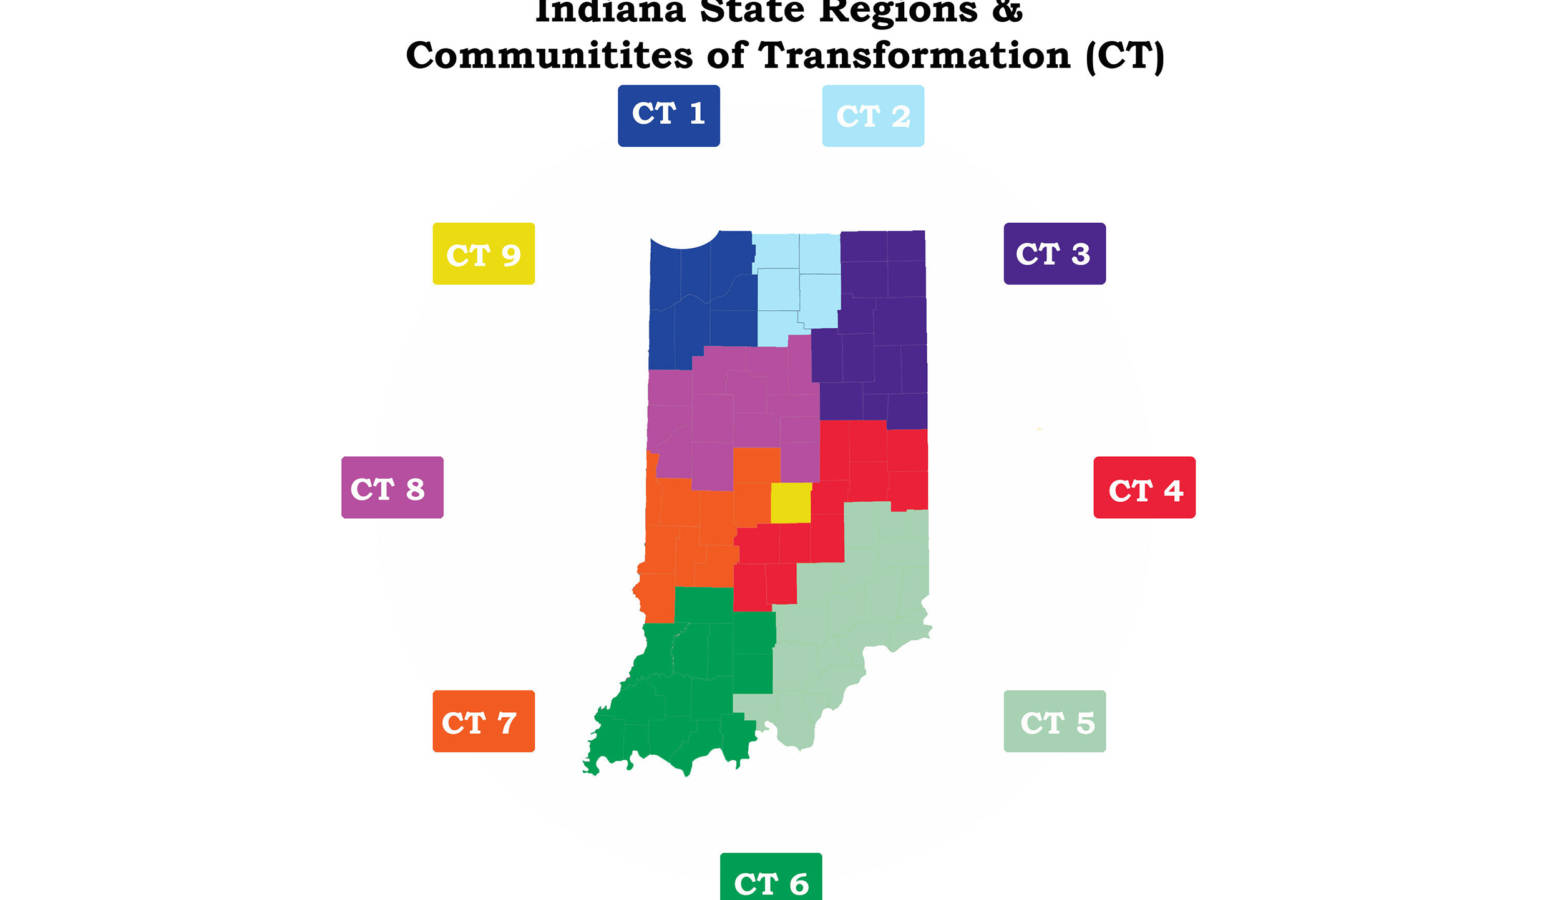 Indiana state regions and communities of transformation are based on the business development regions established by the Indiana Economic Development Corporation. (Courtesy Indiana University)